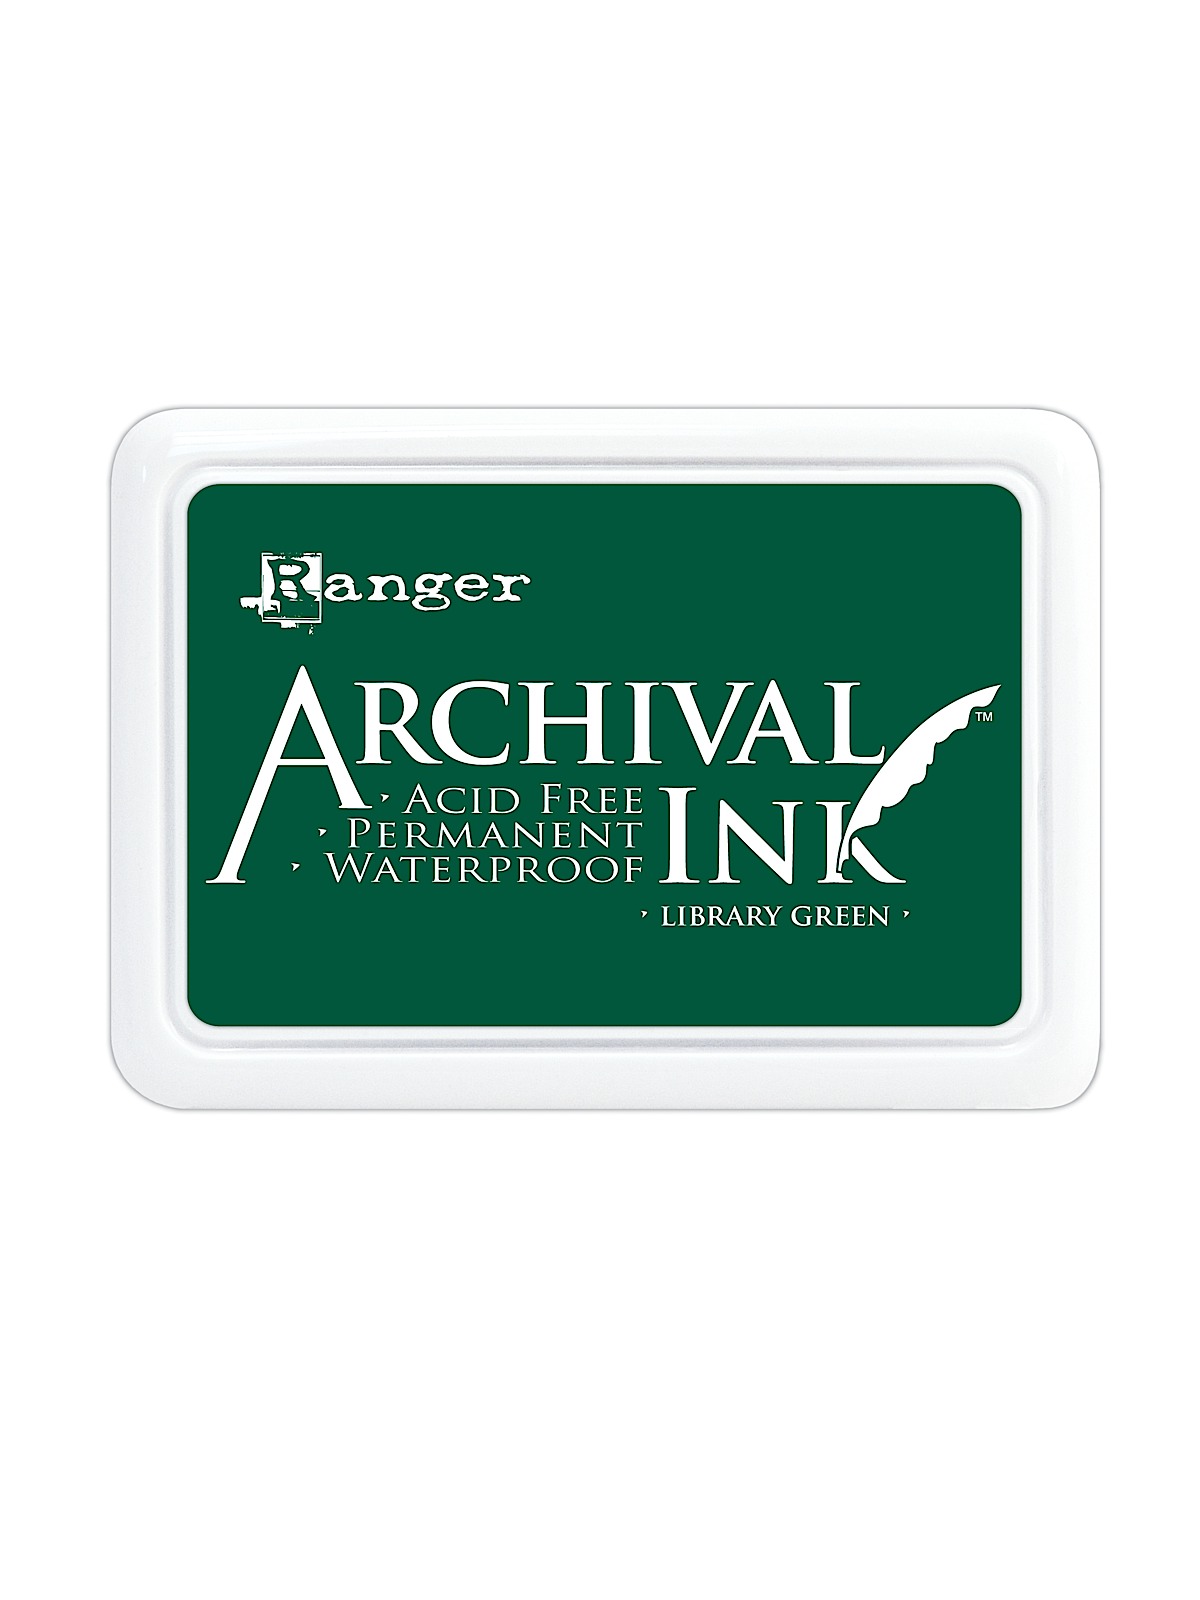 Archival Ink Library Green 2 1 2 In. X 3 3 4 In. Pad